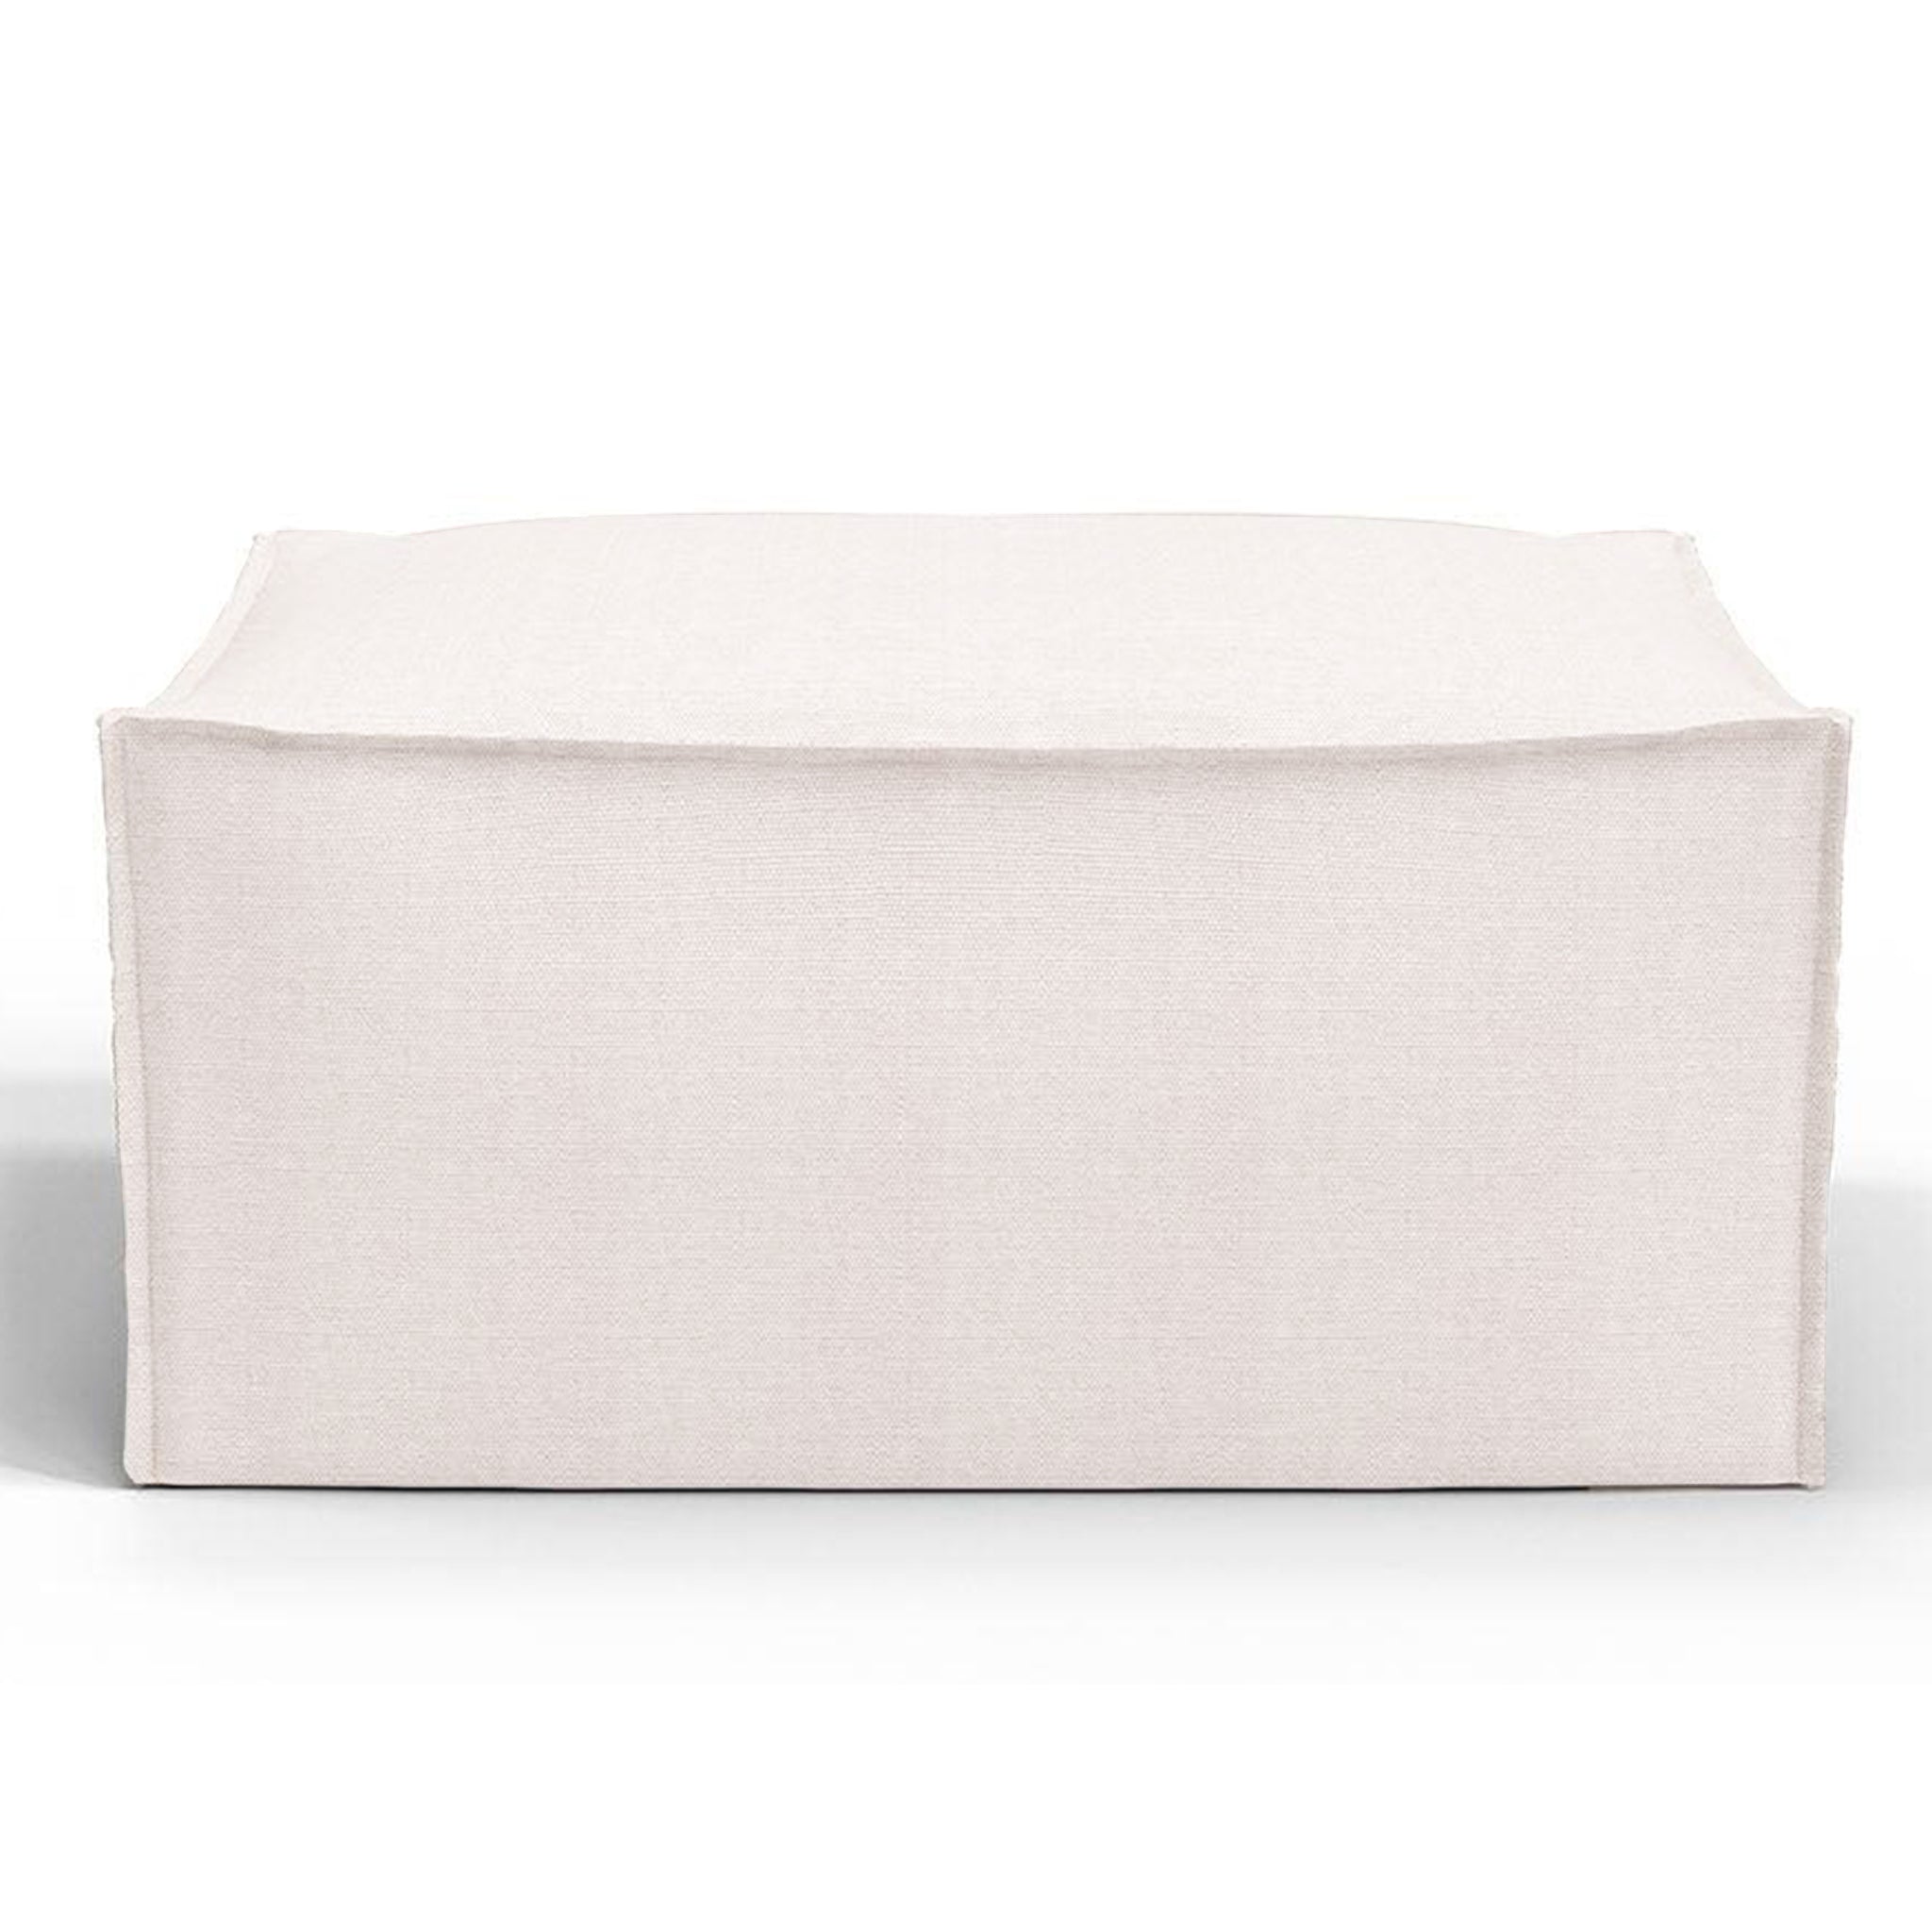 Light beige ottoman with a sleek, minimalist design, perfect for complementing modern living room decor and serving as versatile seating or a footrest.